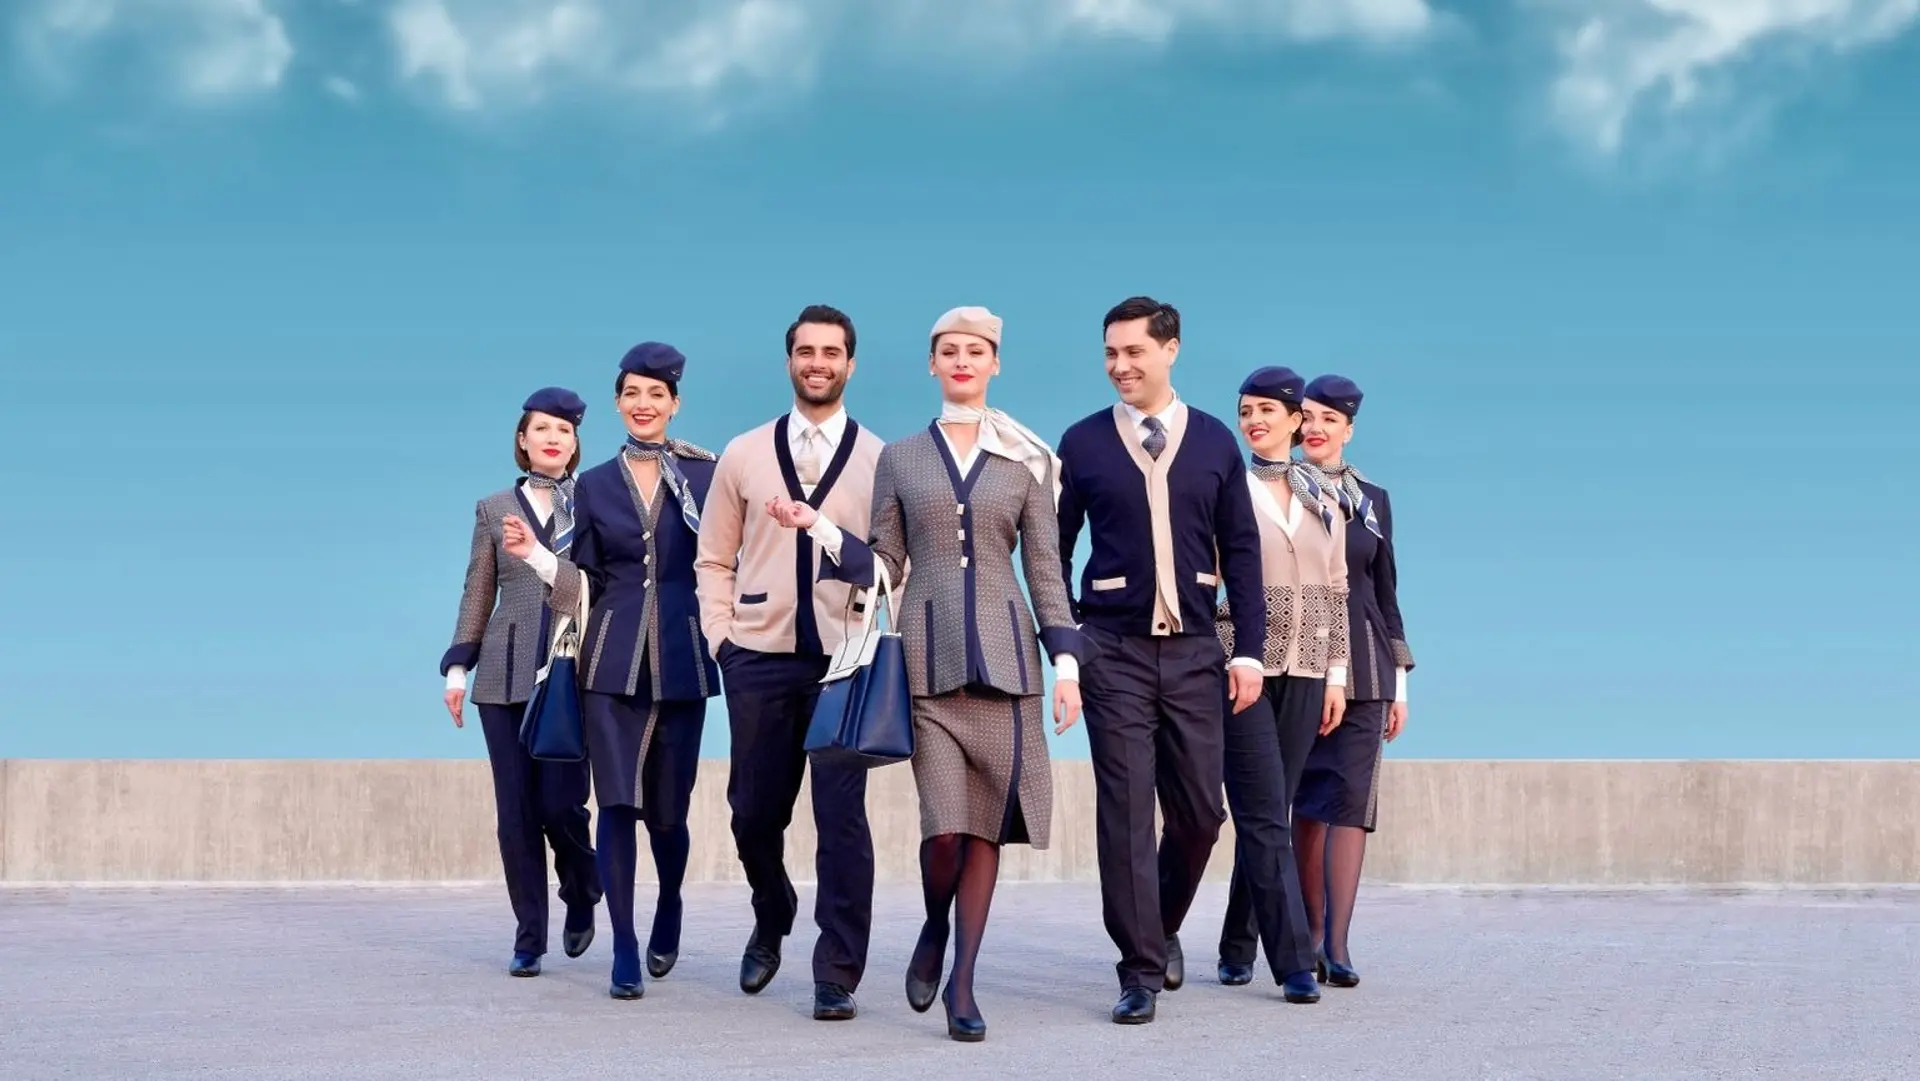 Airlines News - Kuwait Airways expands and upgrades - from uniforms to Business Class cabins